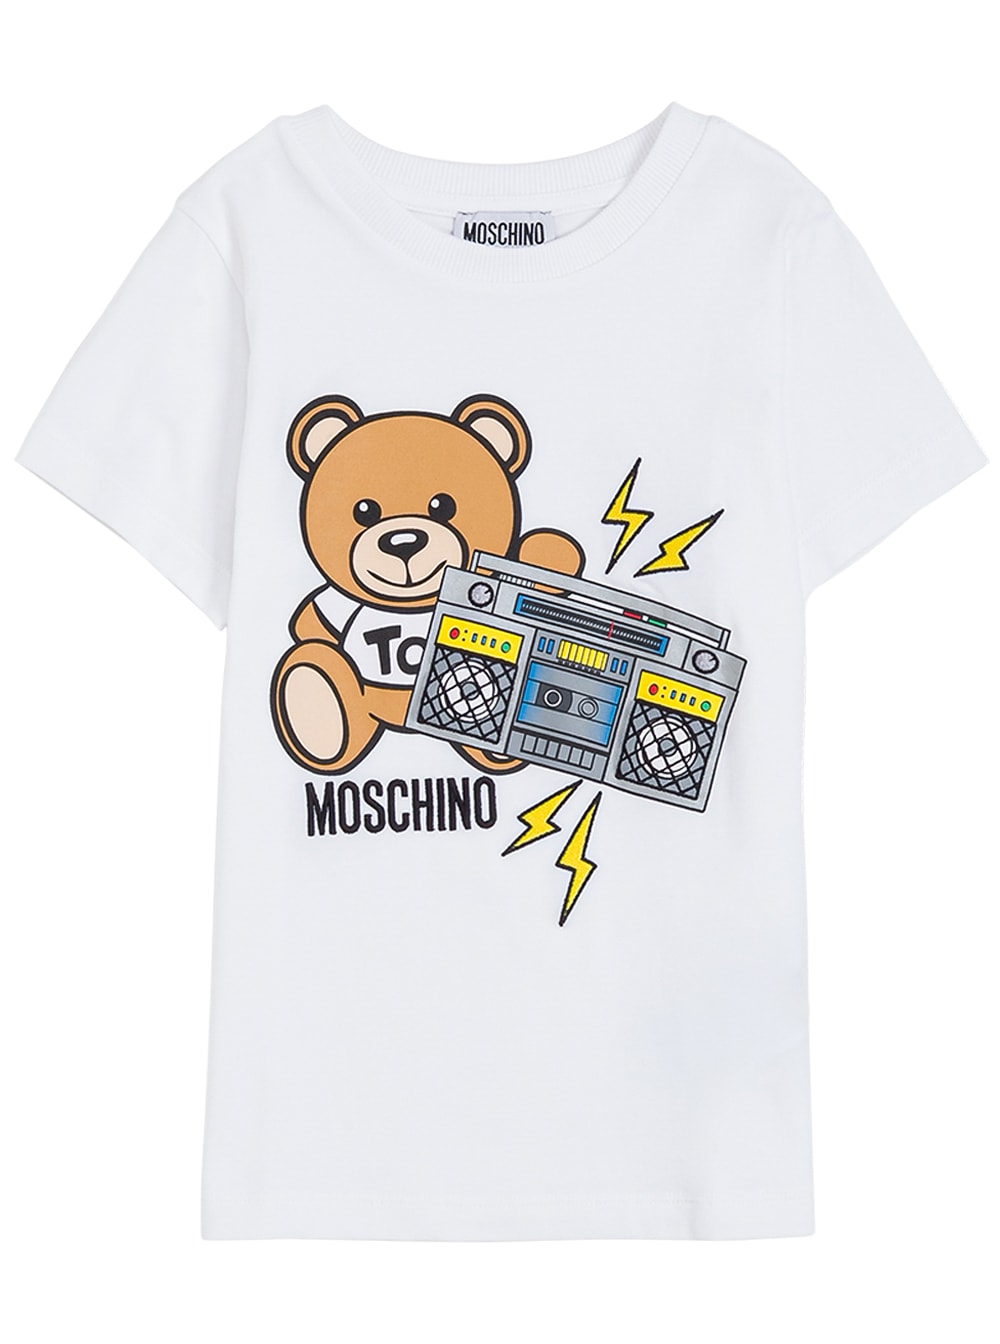 Moschino White Cotton T-shirt With Teddy Music Print